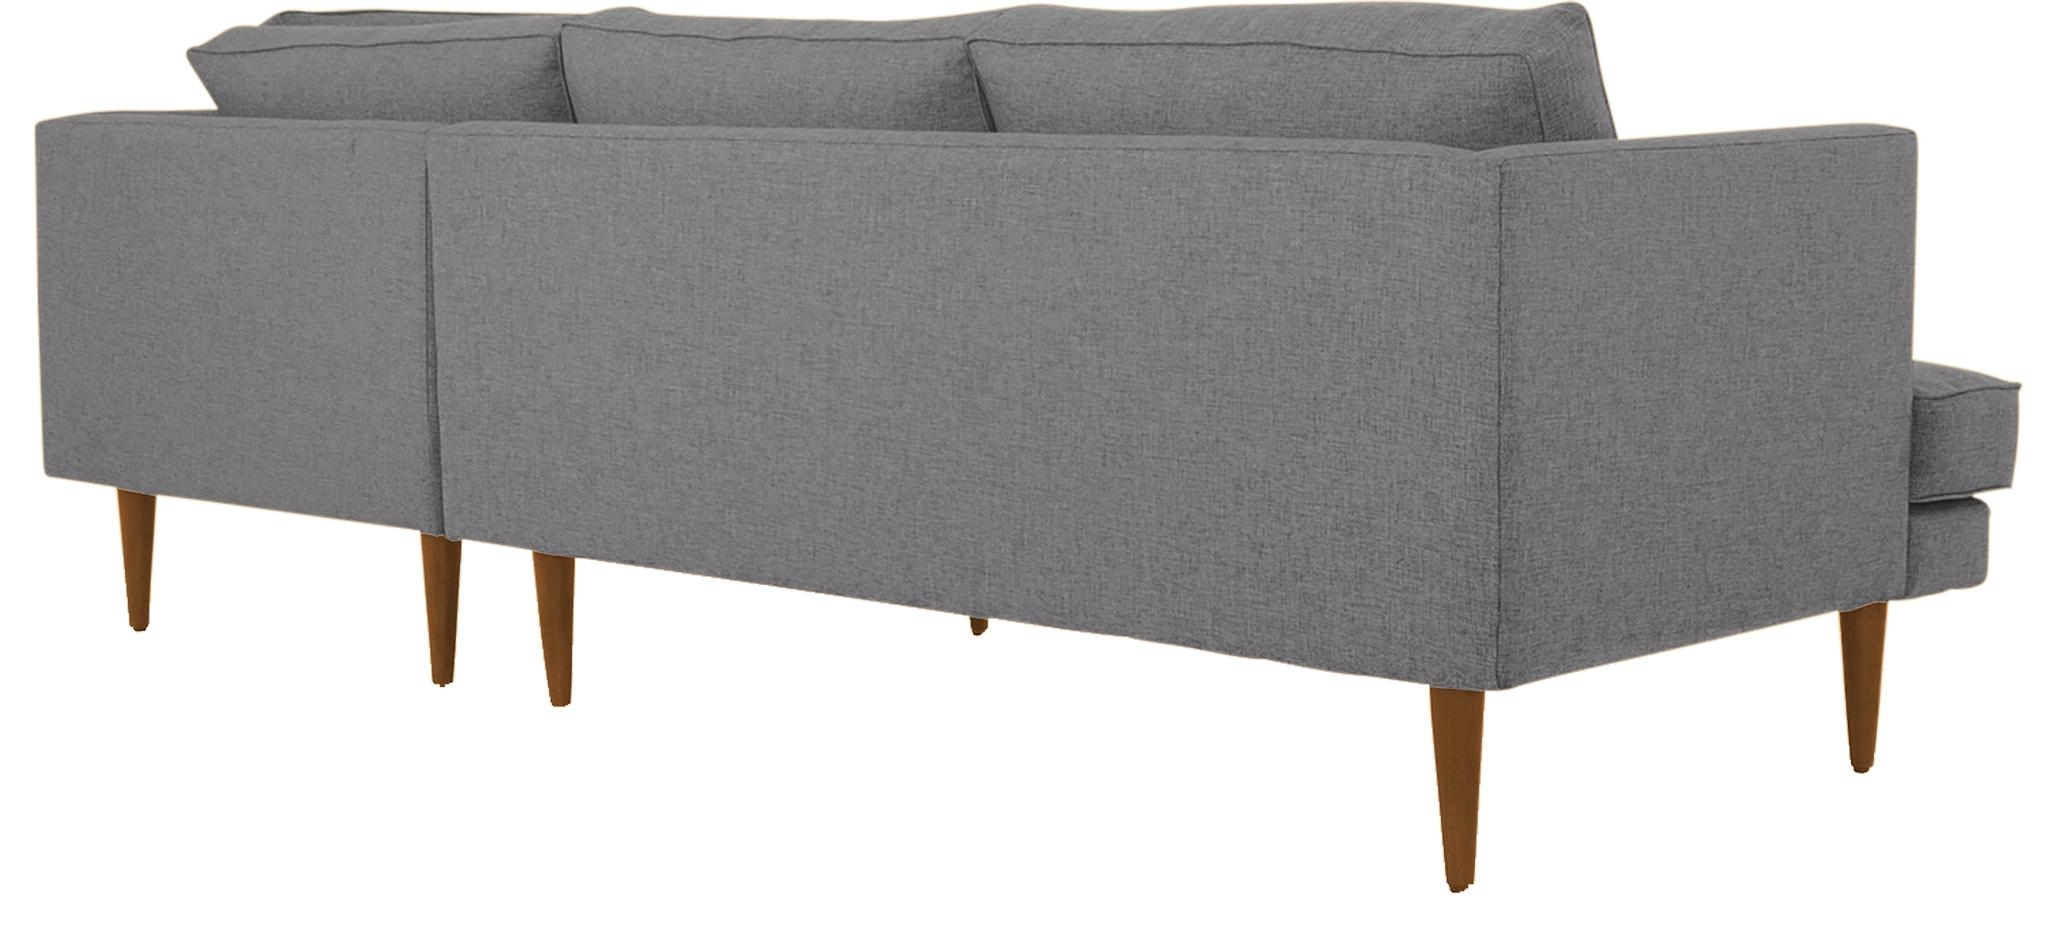 Gray Preston Mid Century Modern Sectional with Bumper (2 piece) - Royale Ash - Mocha - Right  - Image 3